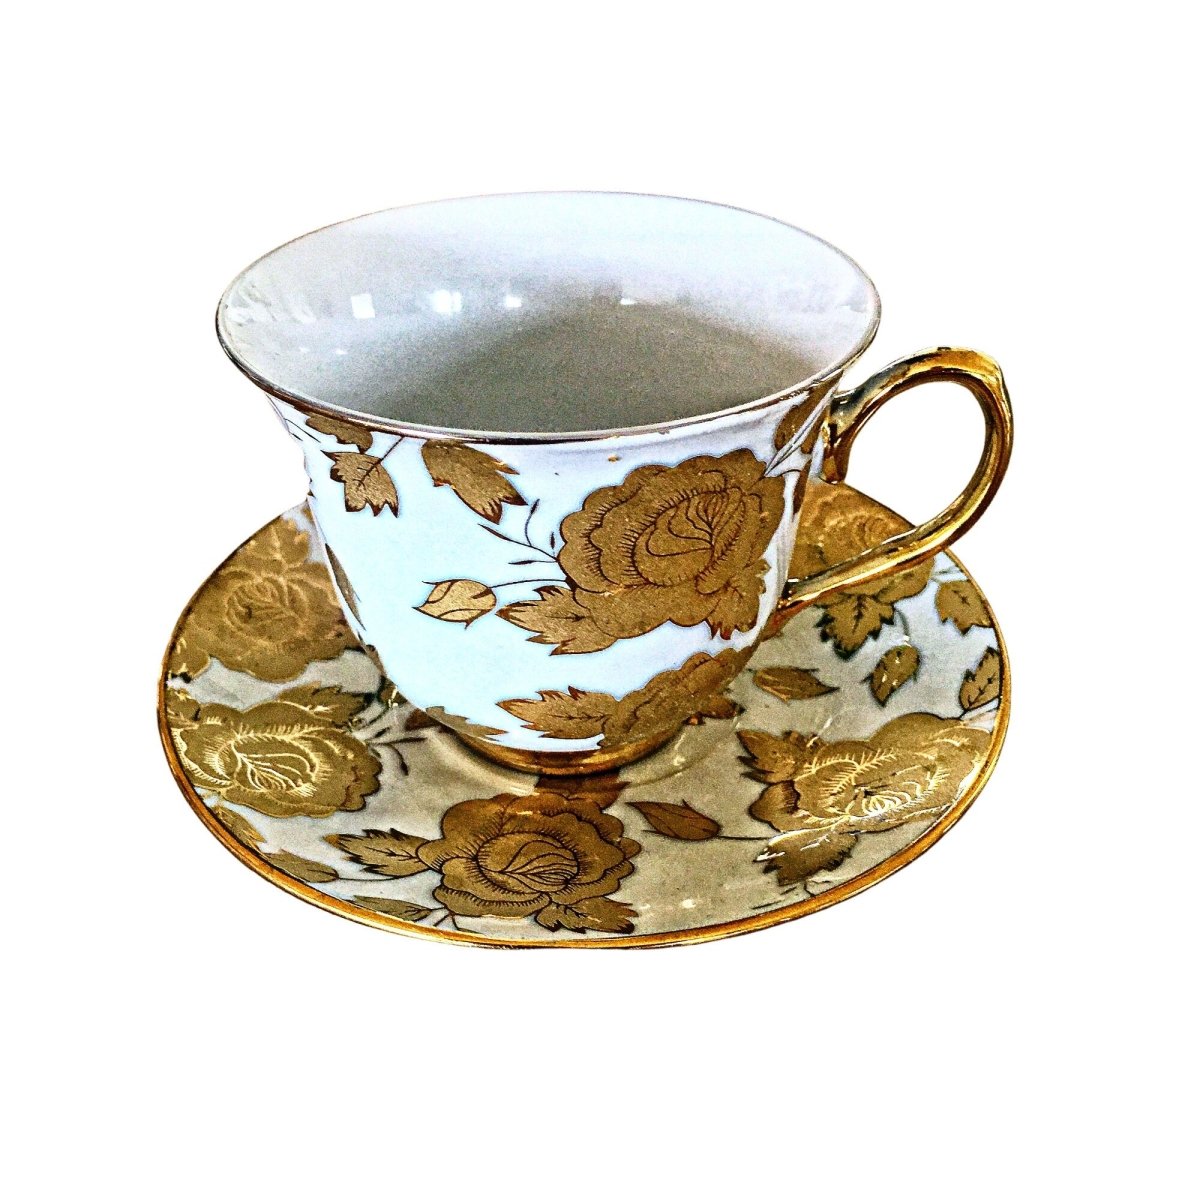 Lusterware | poss. Japanese | Vintage white & gold teapot with matching cups - Chinamania.shop